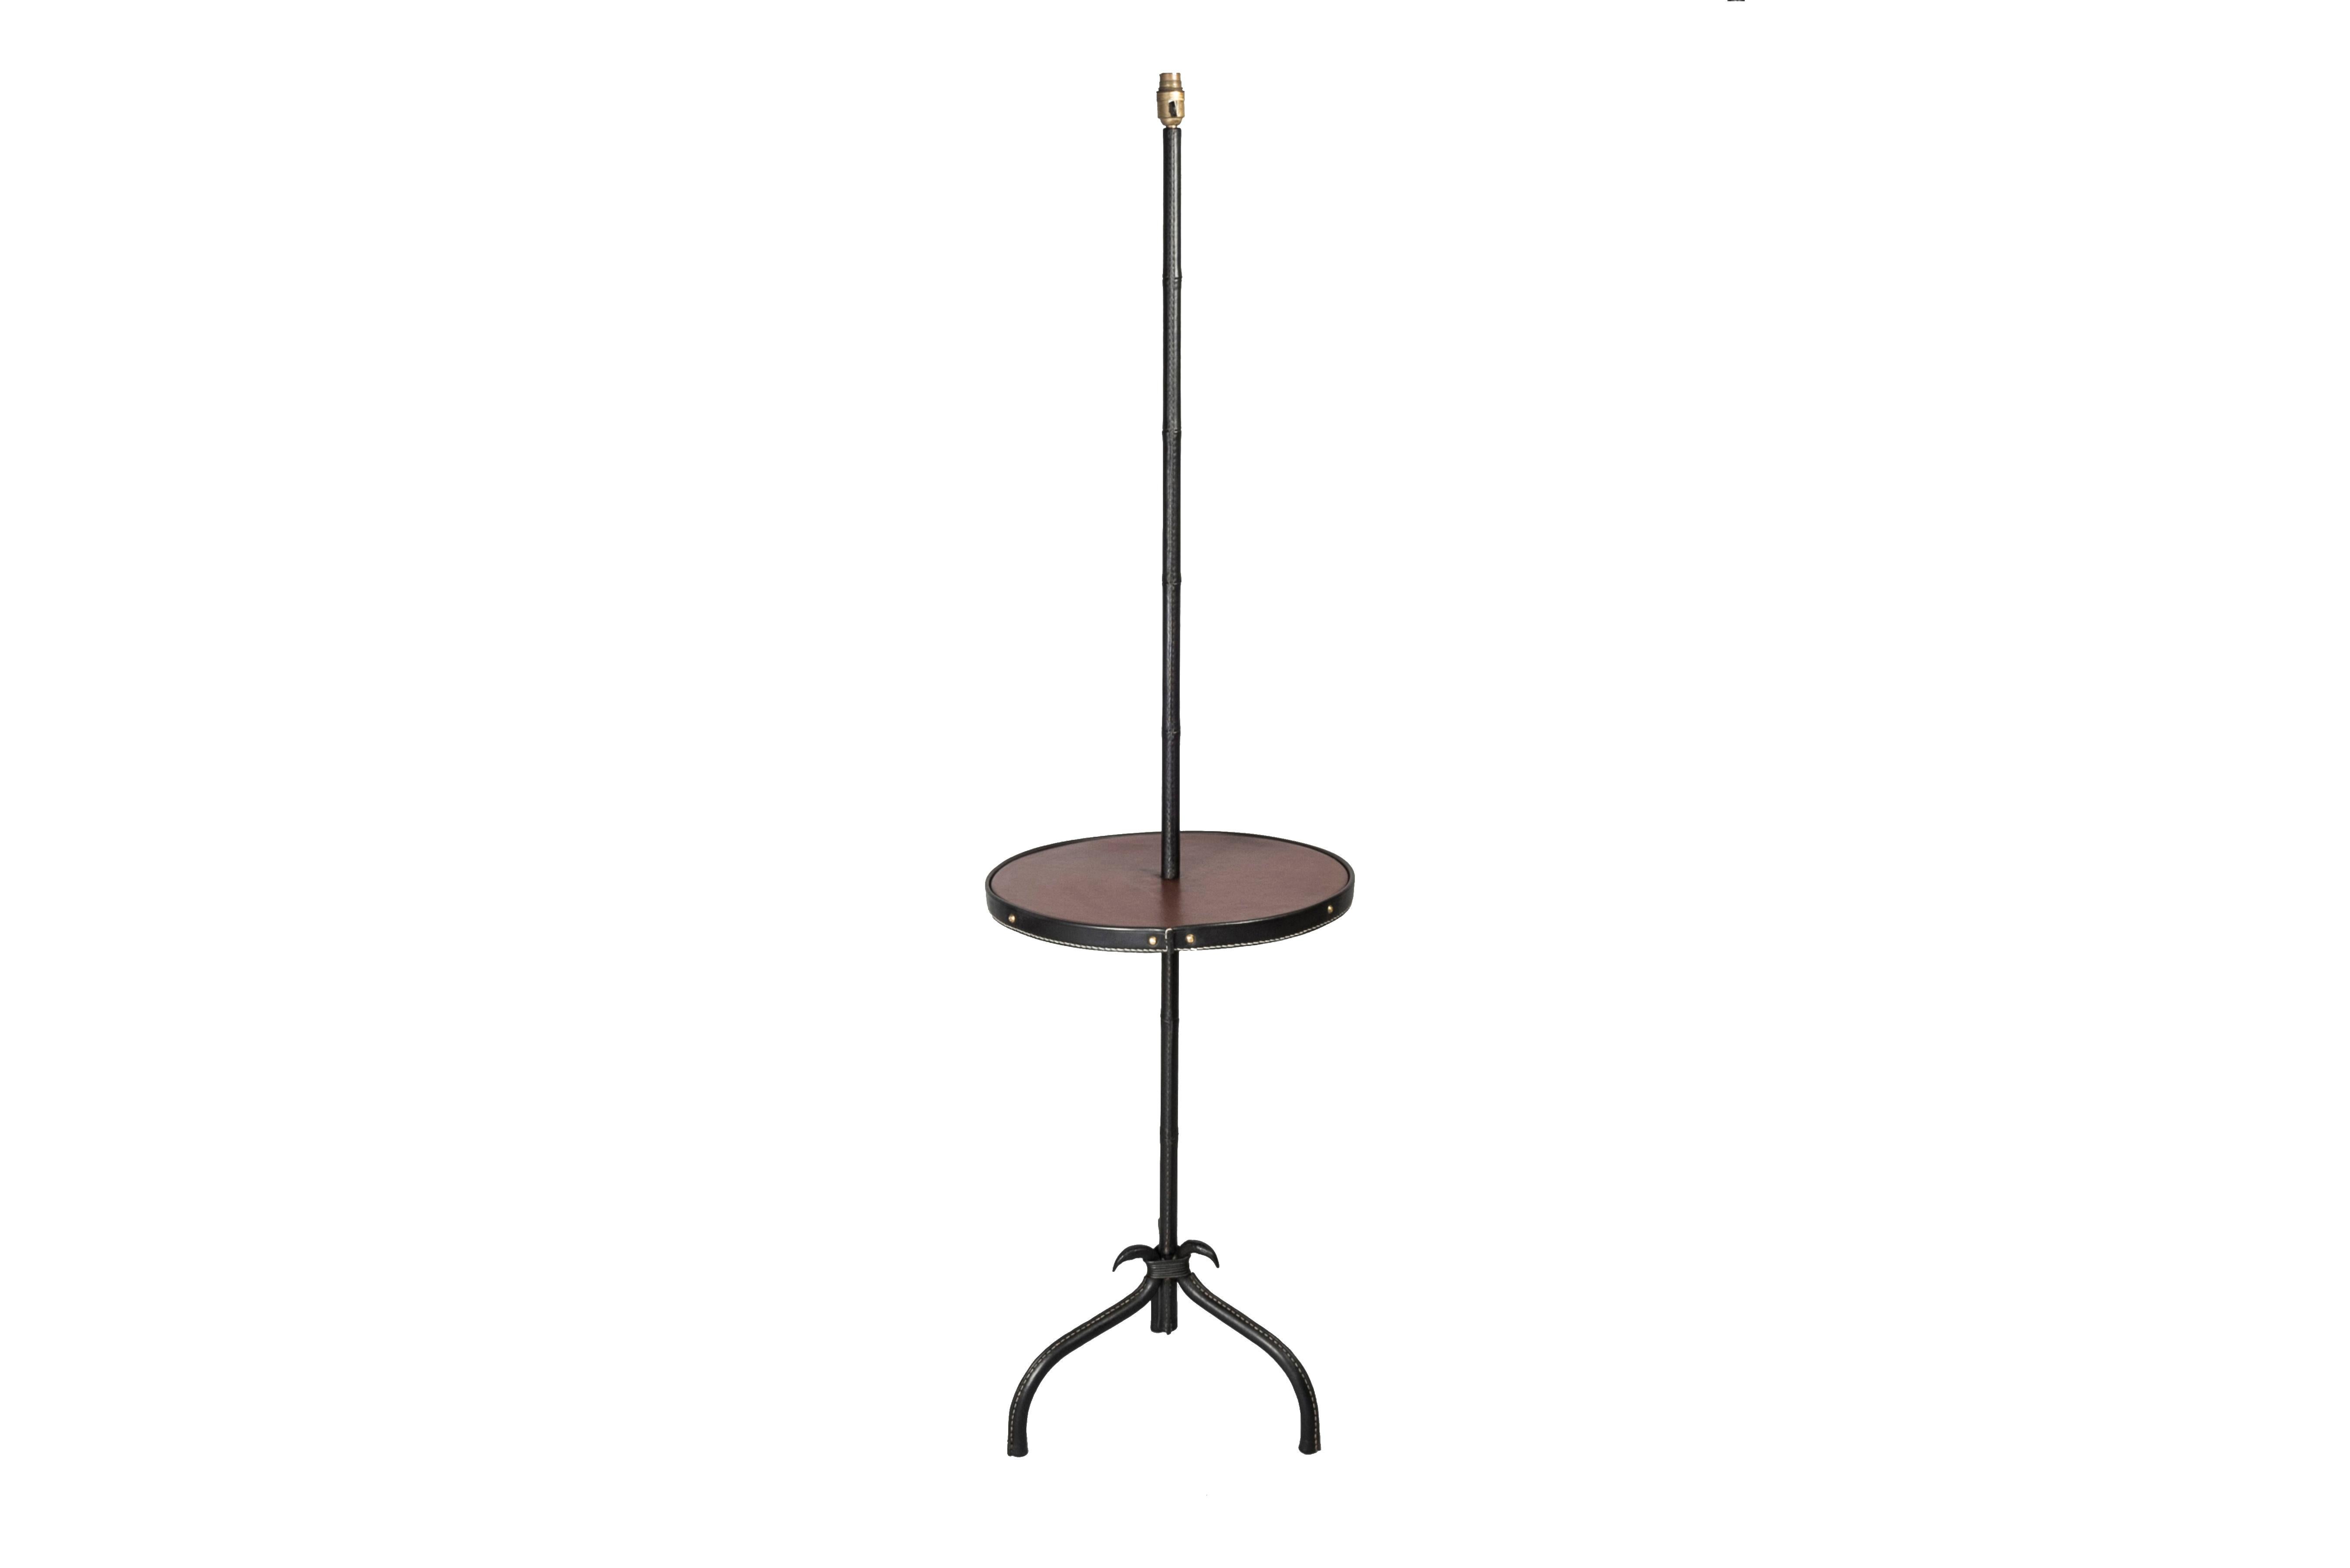 1950's Stitched leather floor lamp designed by Jacques Adnet
Black and chocolate brown leather 
Dimensions given without shade, no shade provided.